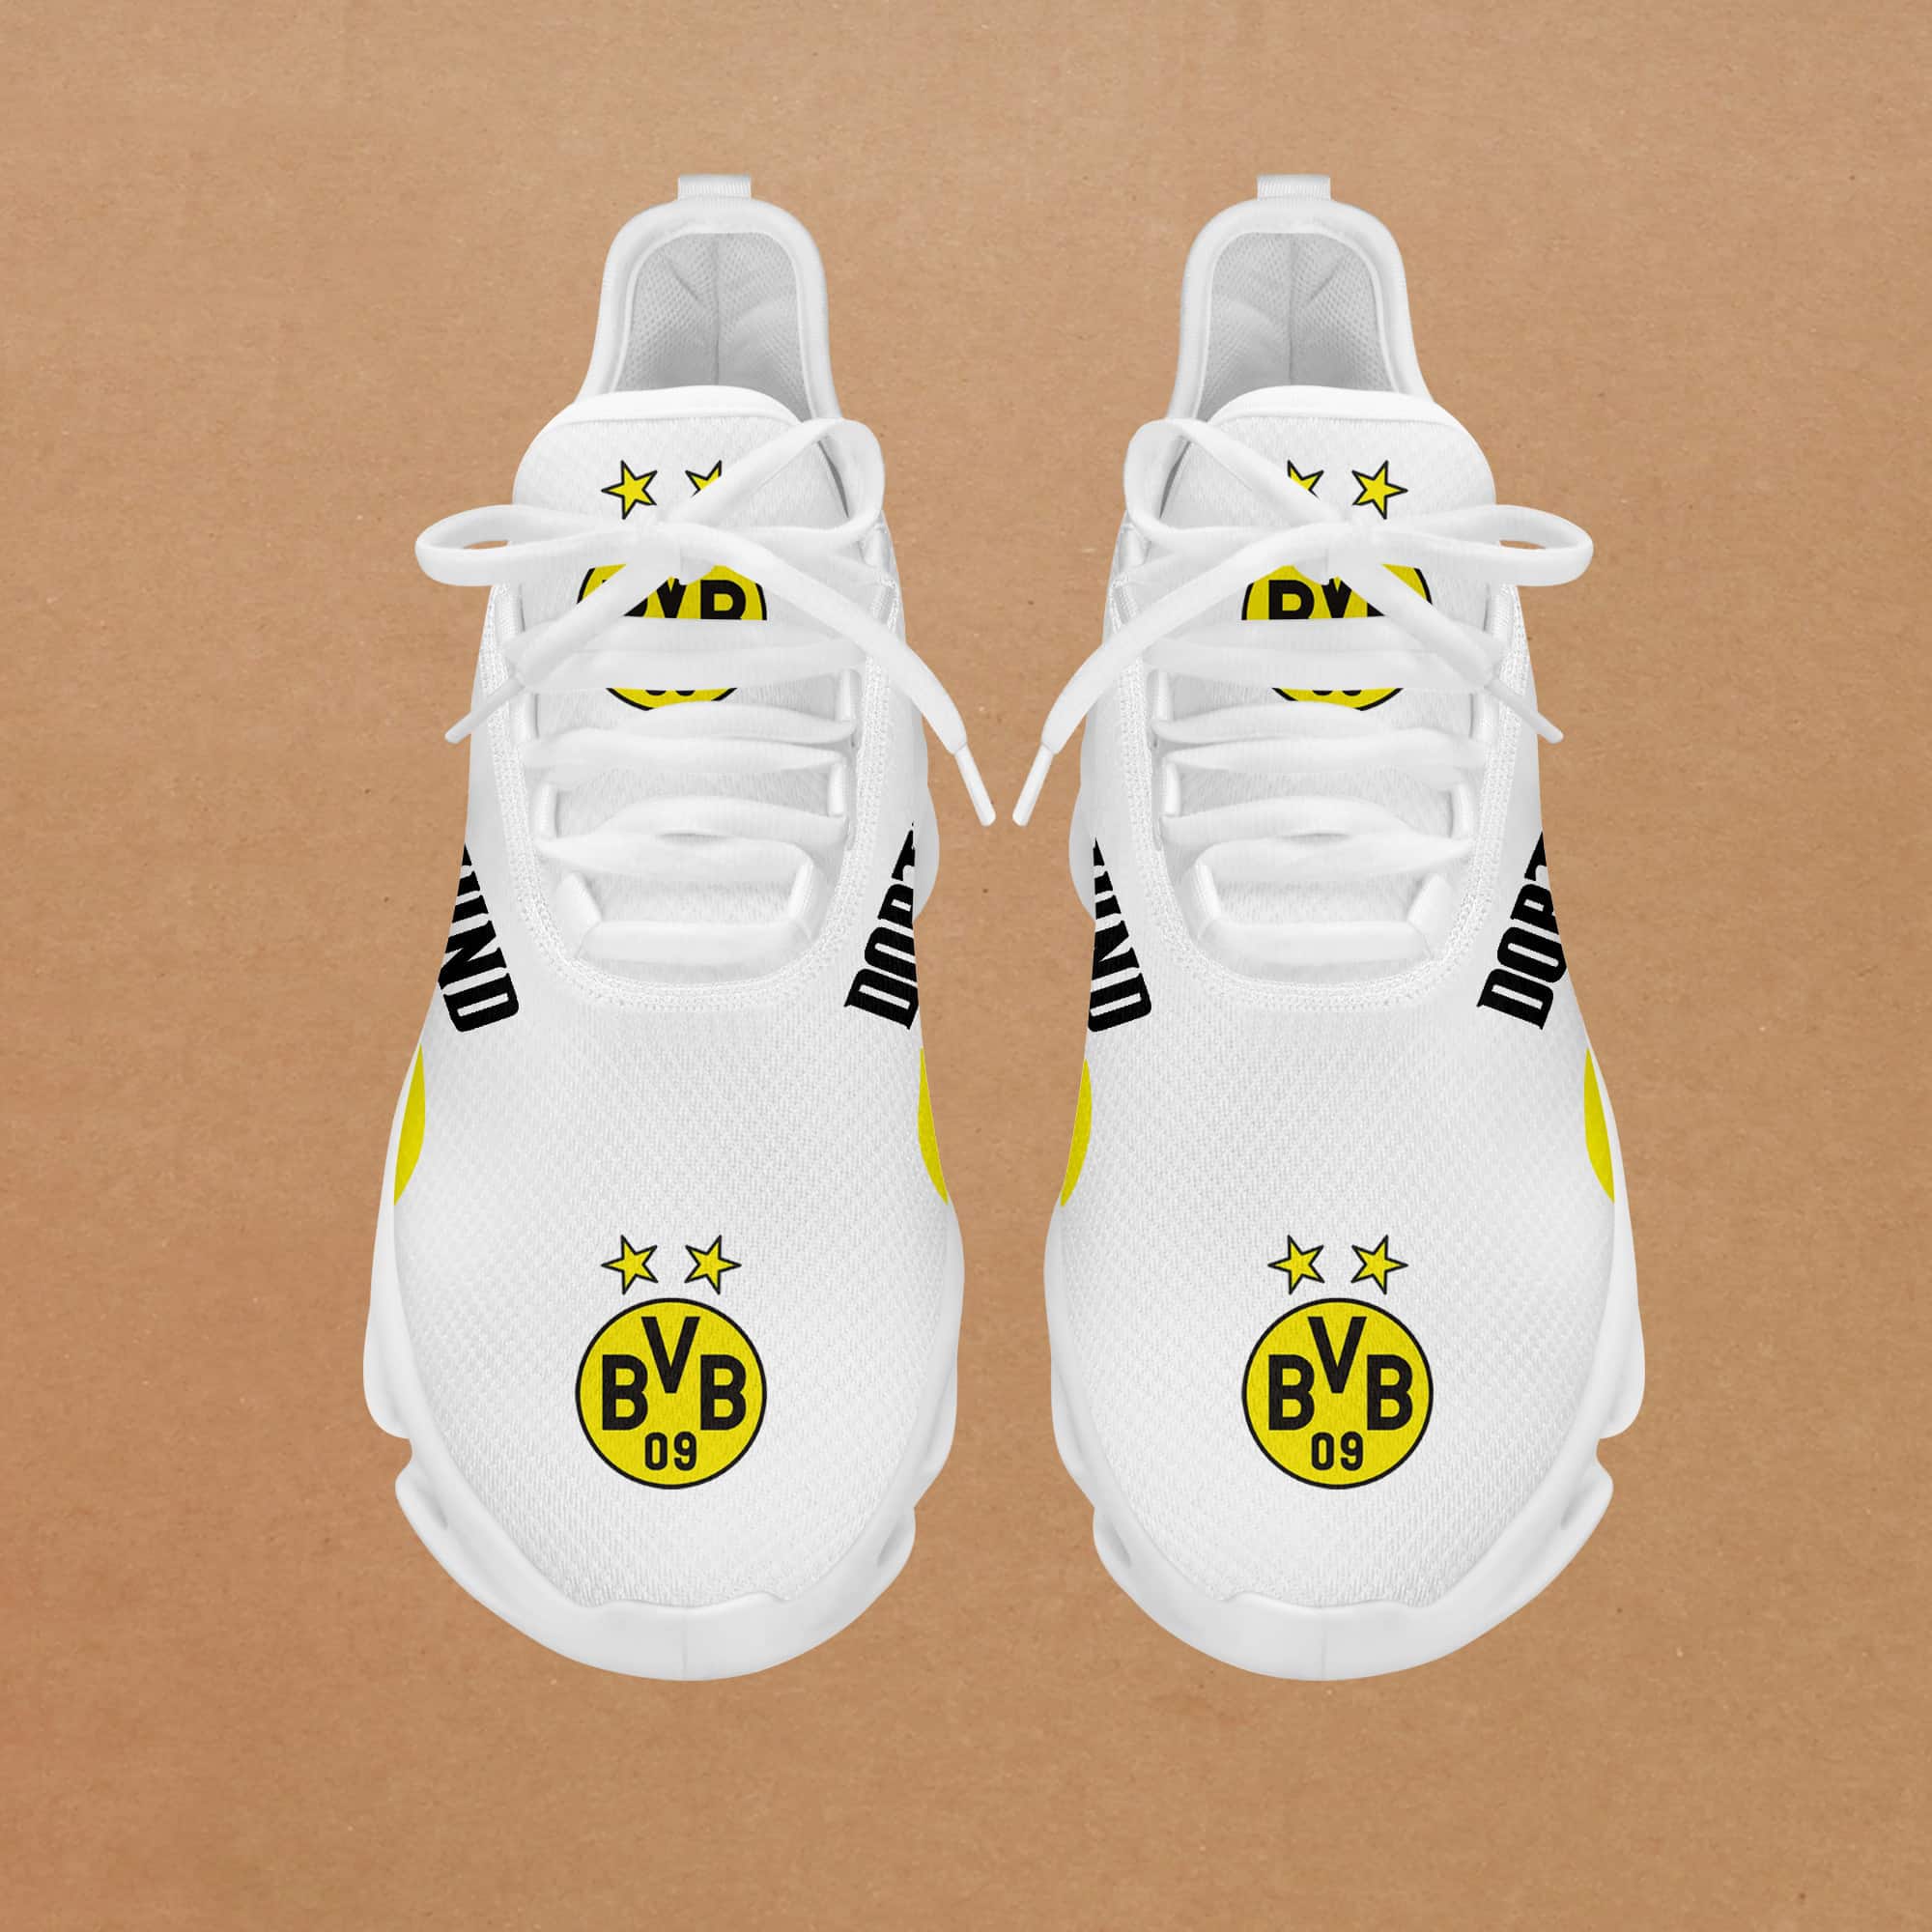 Borussia Dortmund Running Shoes Max Soul Shoes Sneakers Ver 7 3